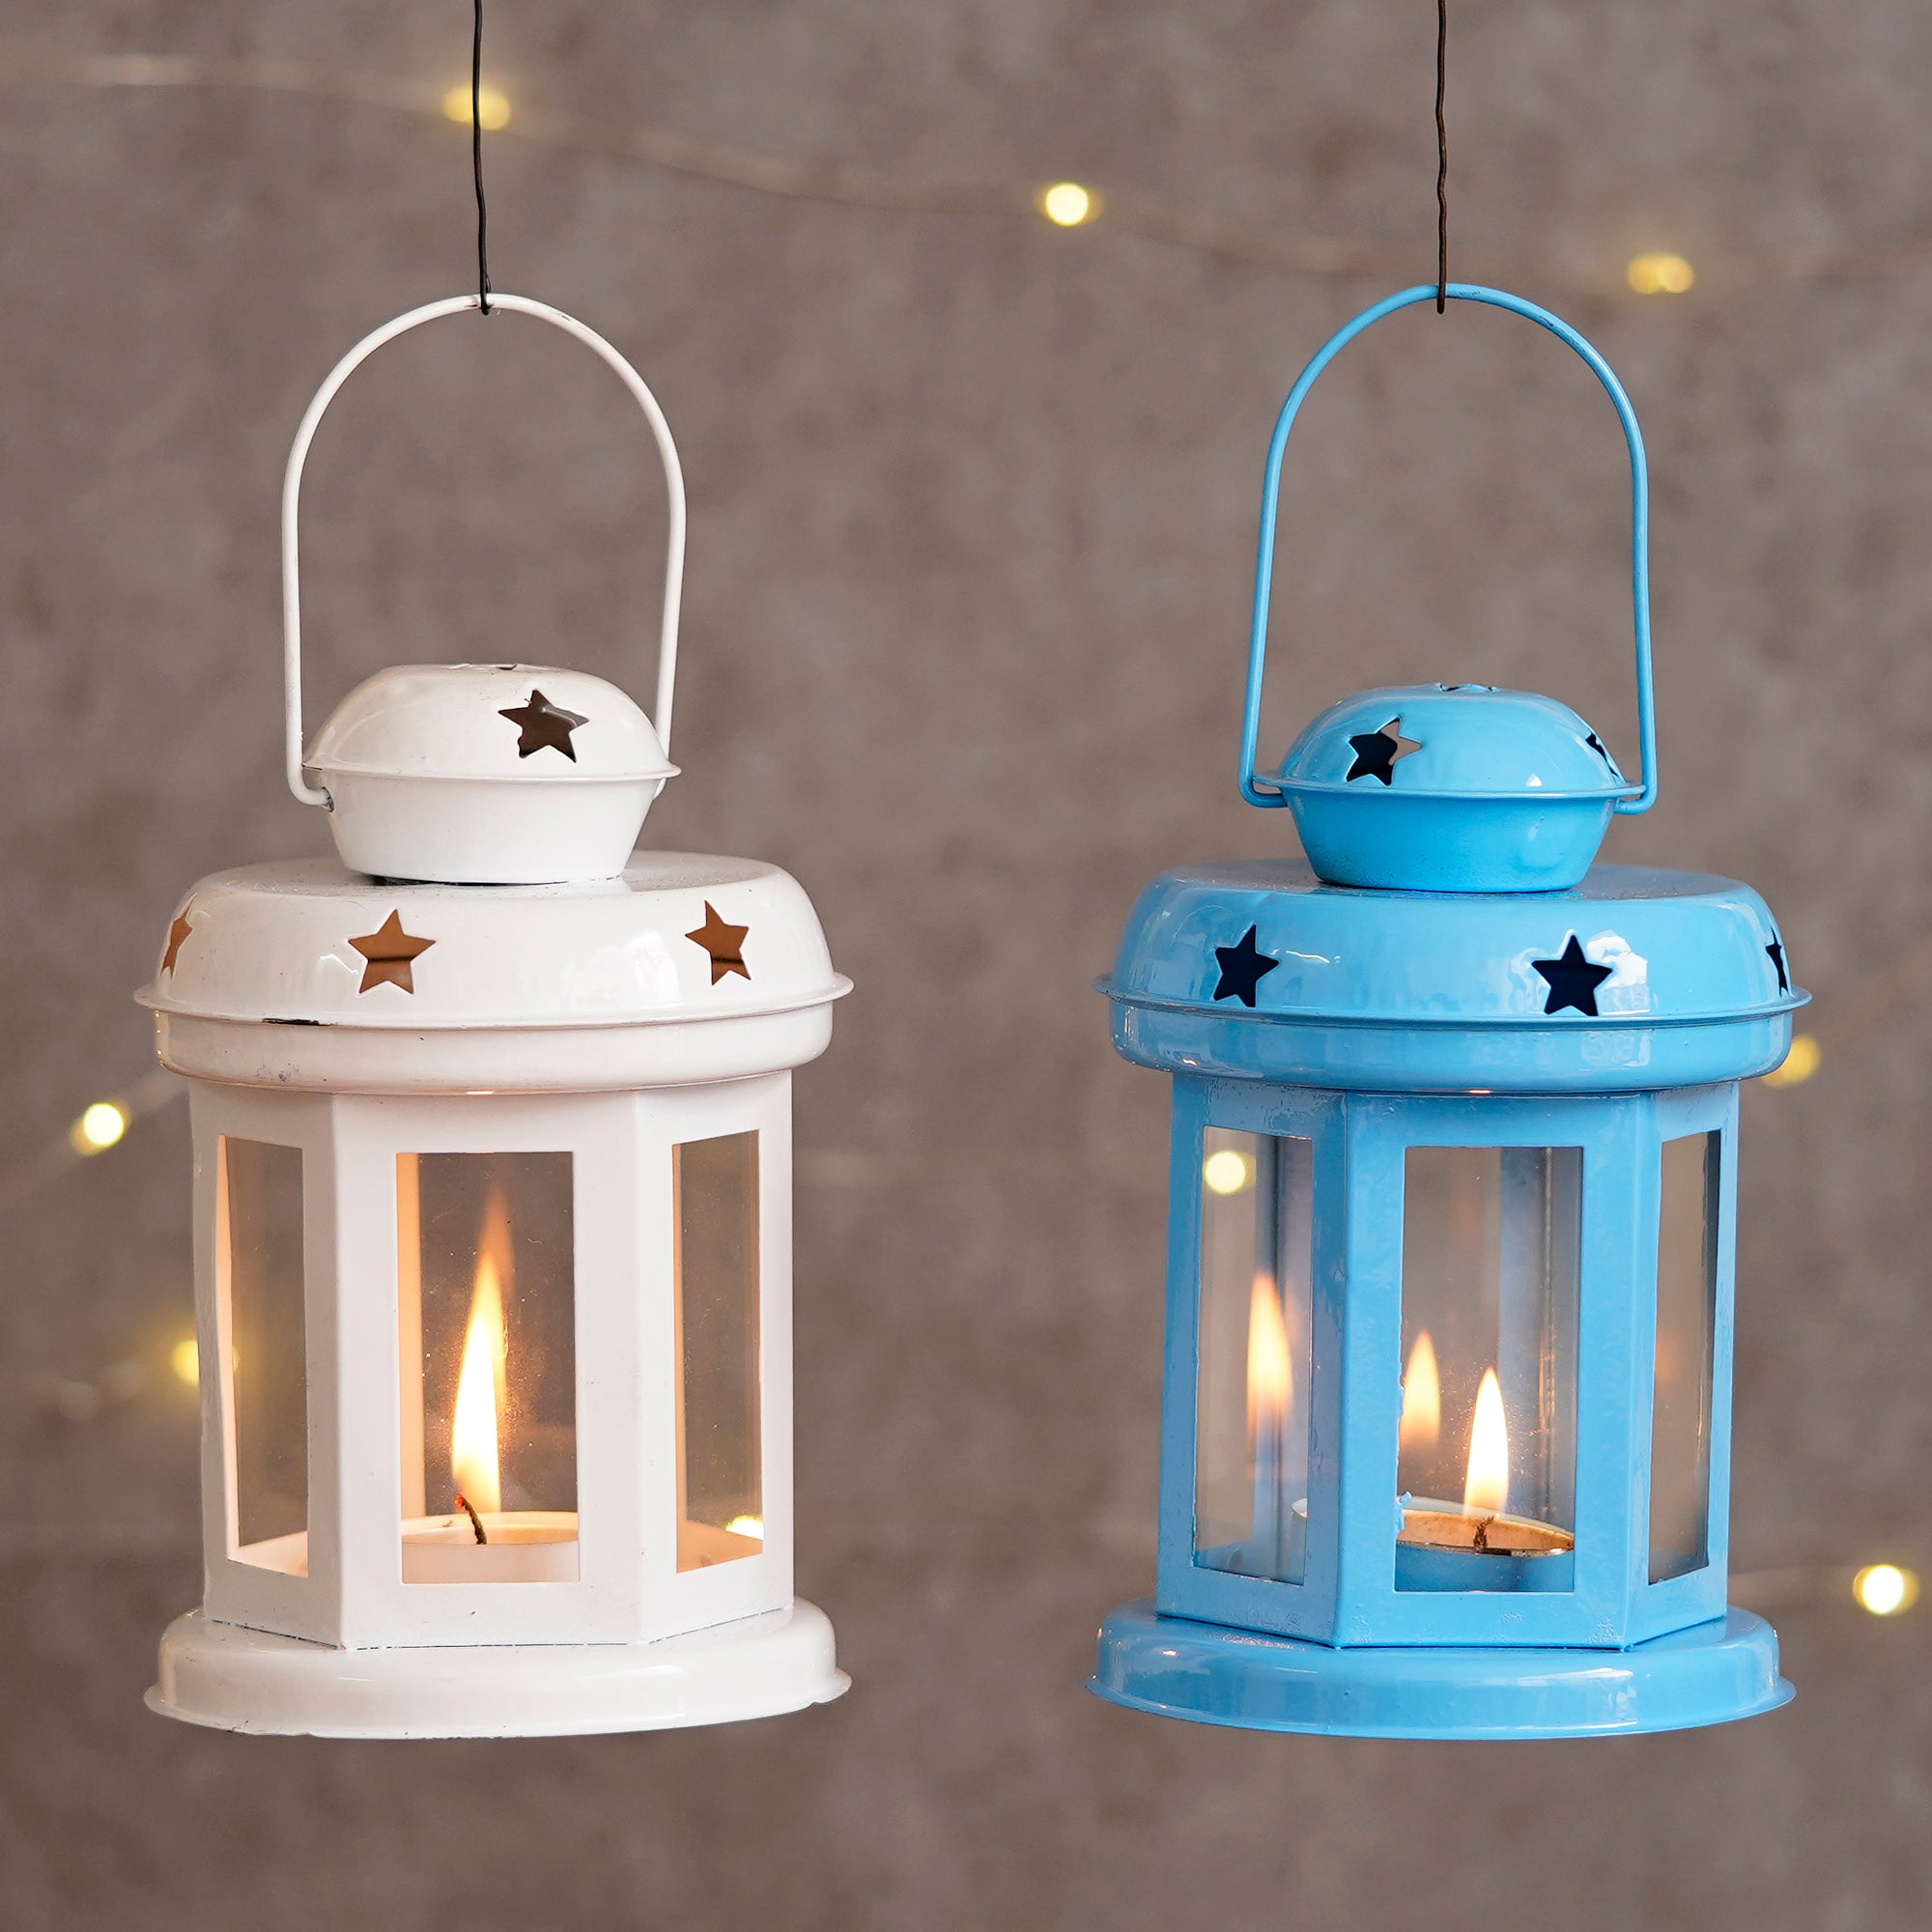 Set of 2 Blue and White Metal hanging Tea Light Candle Holder Lantern with Tealight Candle 1